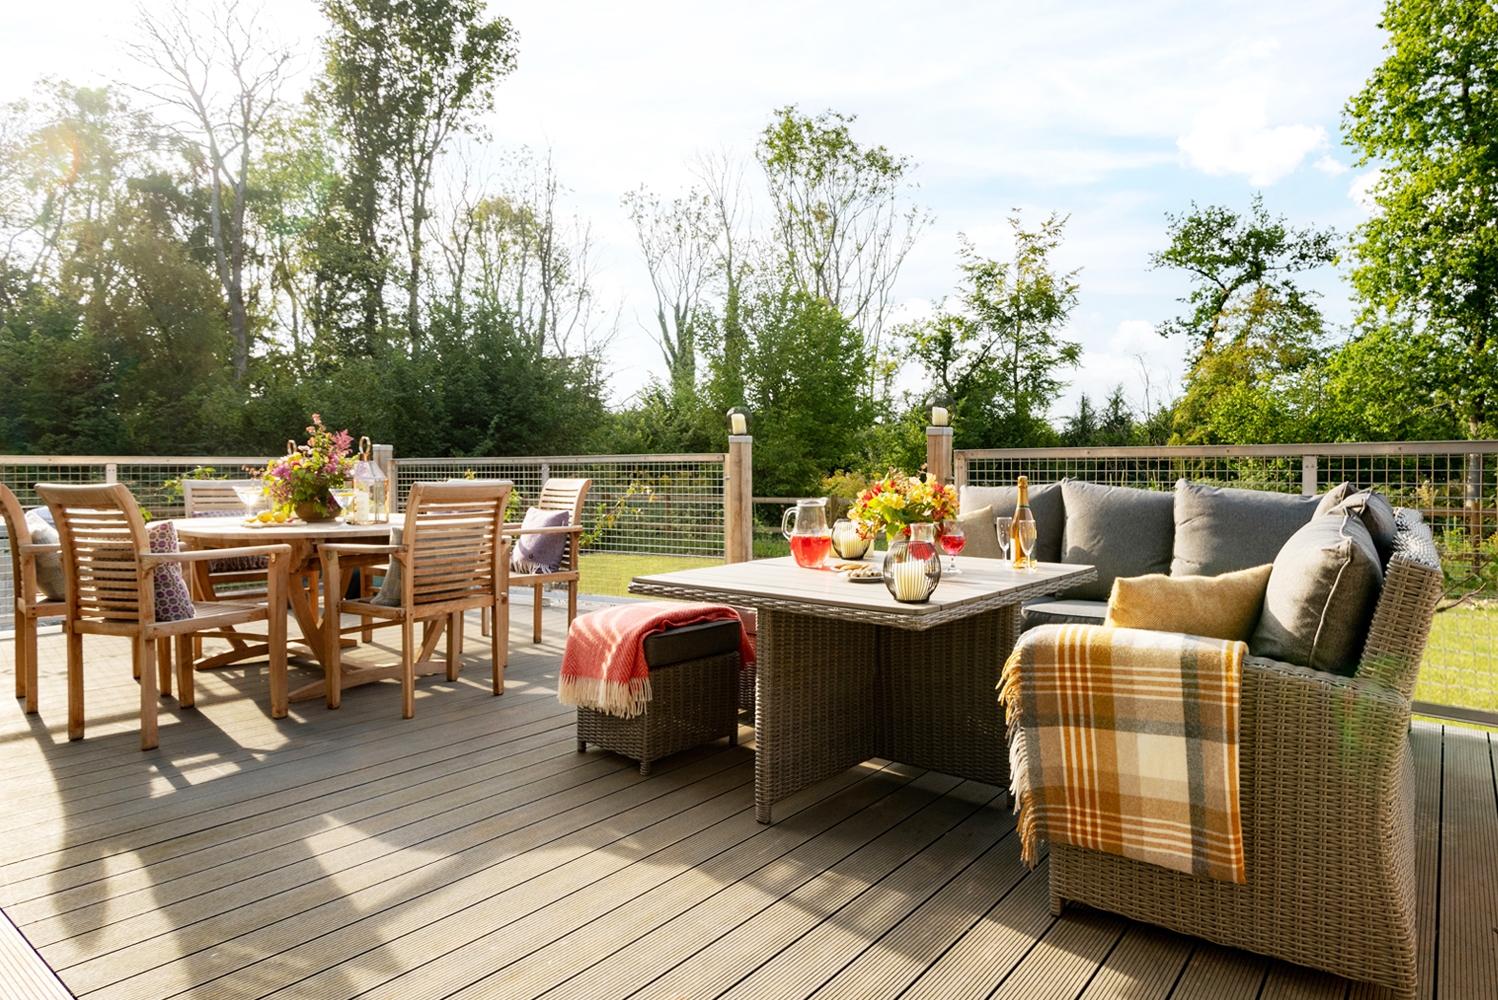 A beautiful summer evening on the deck of Portuguese Laurel, Grenville at Wallops Wood with cosy throws and cushions over the rattan furniture, and the outdoor dining table laid for an al fresco meal